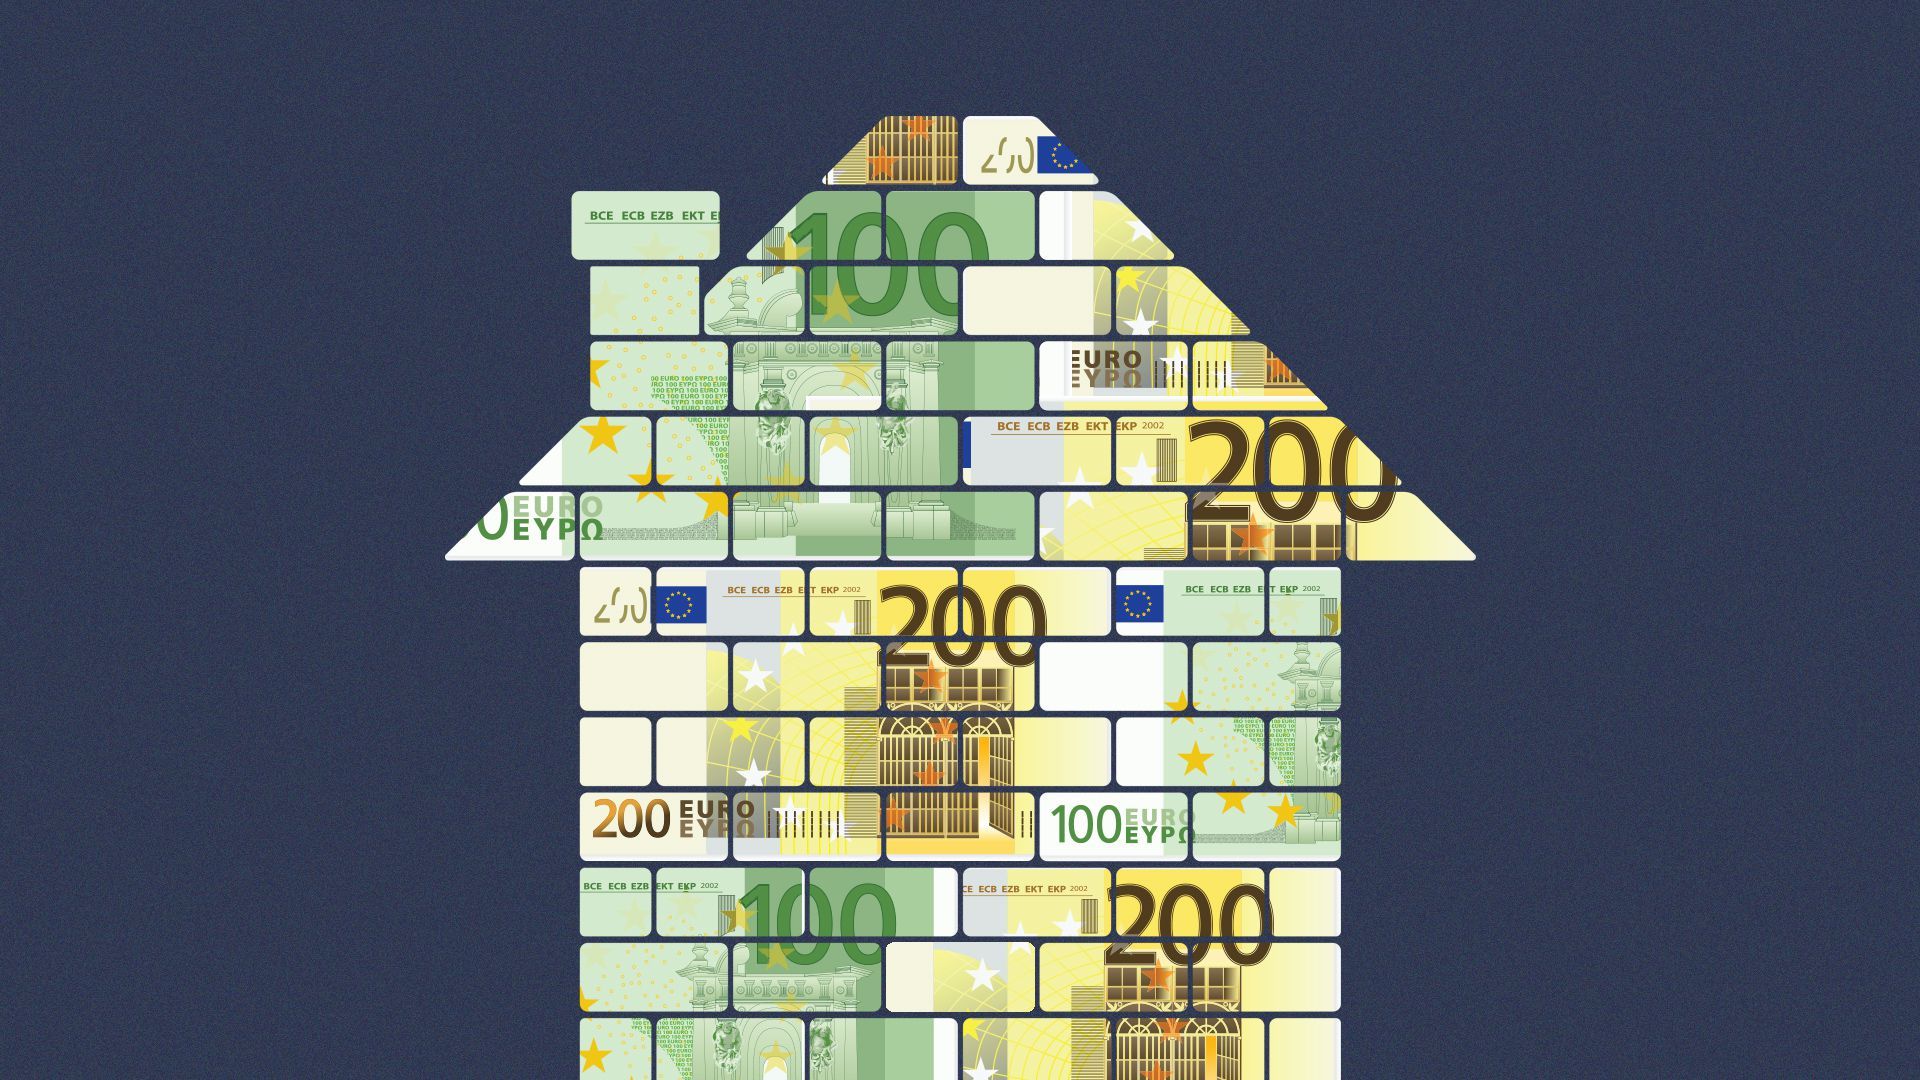 Illustration of a house made of Euro notes.